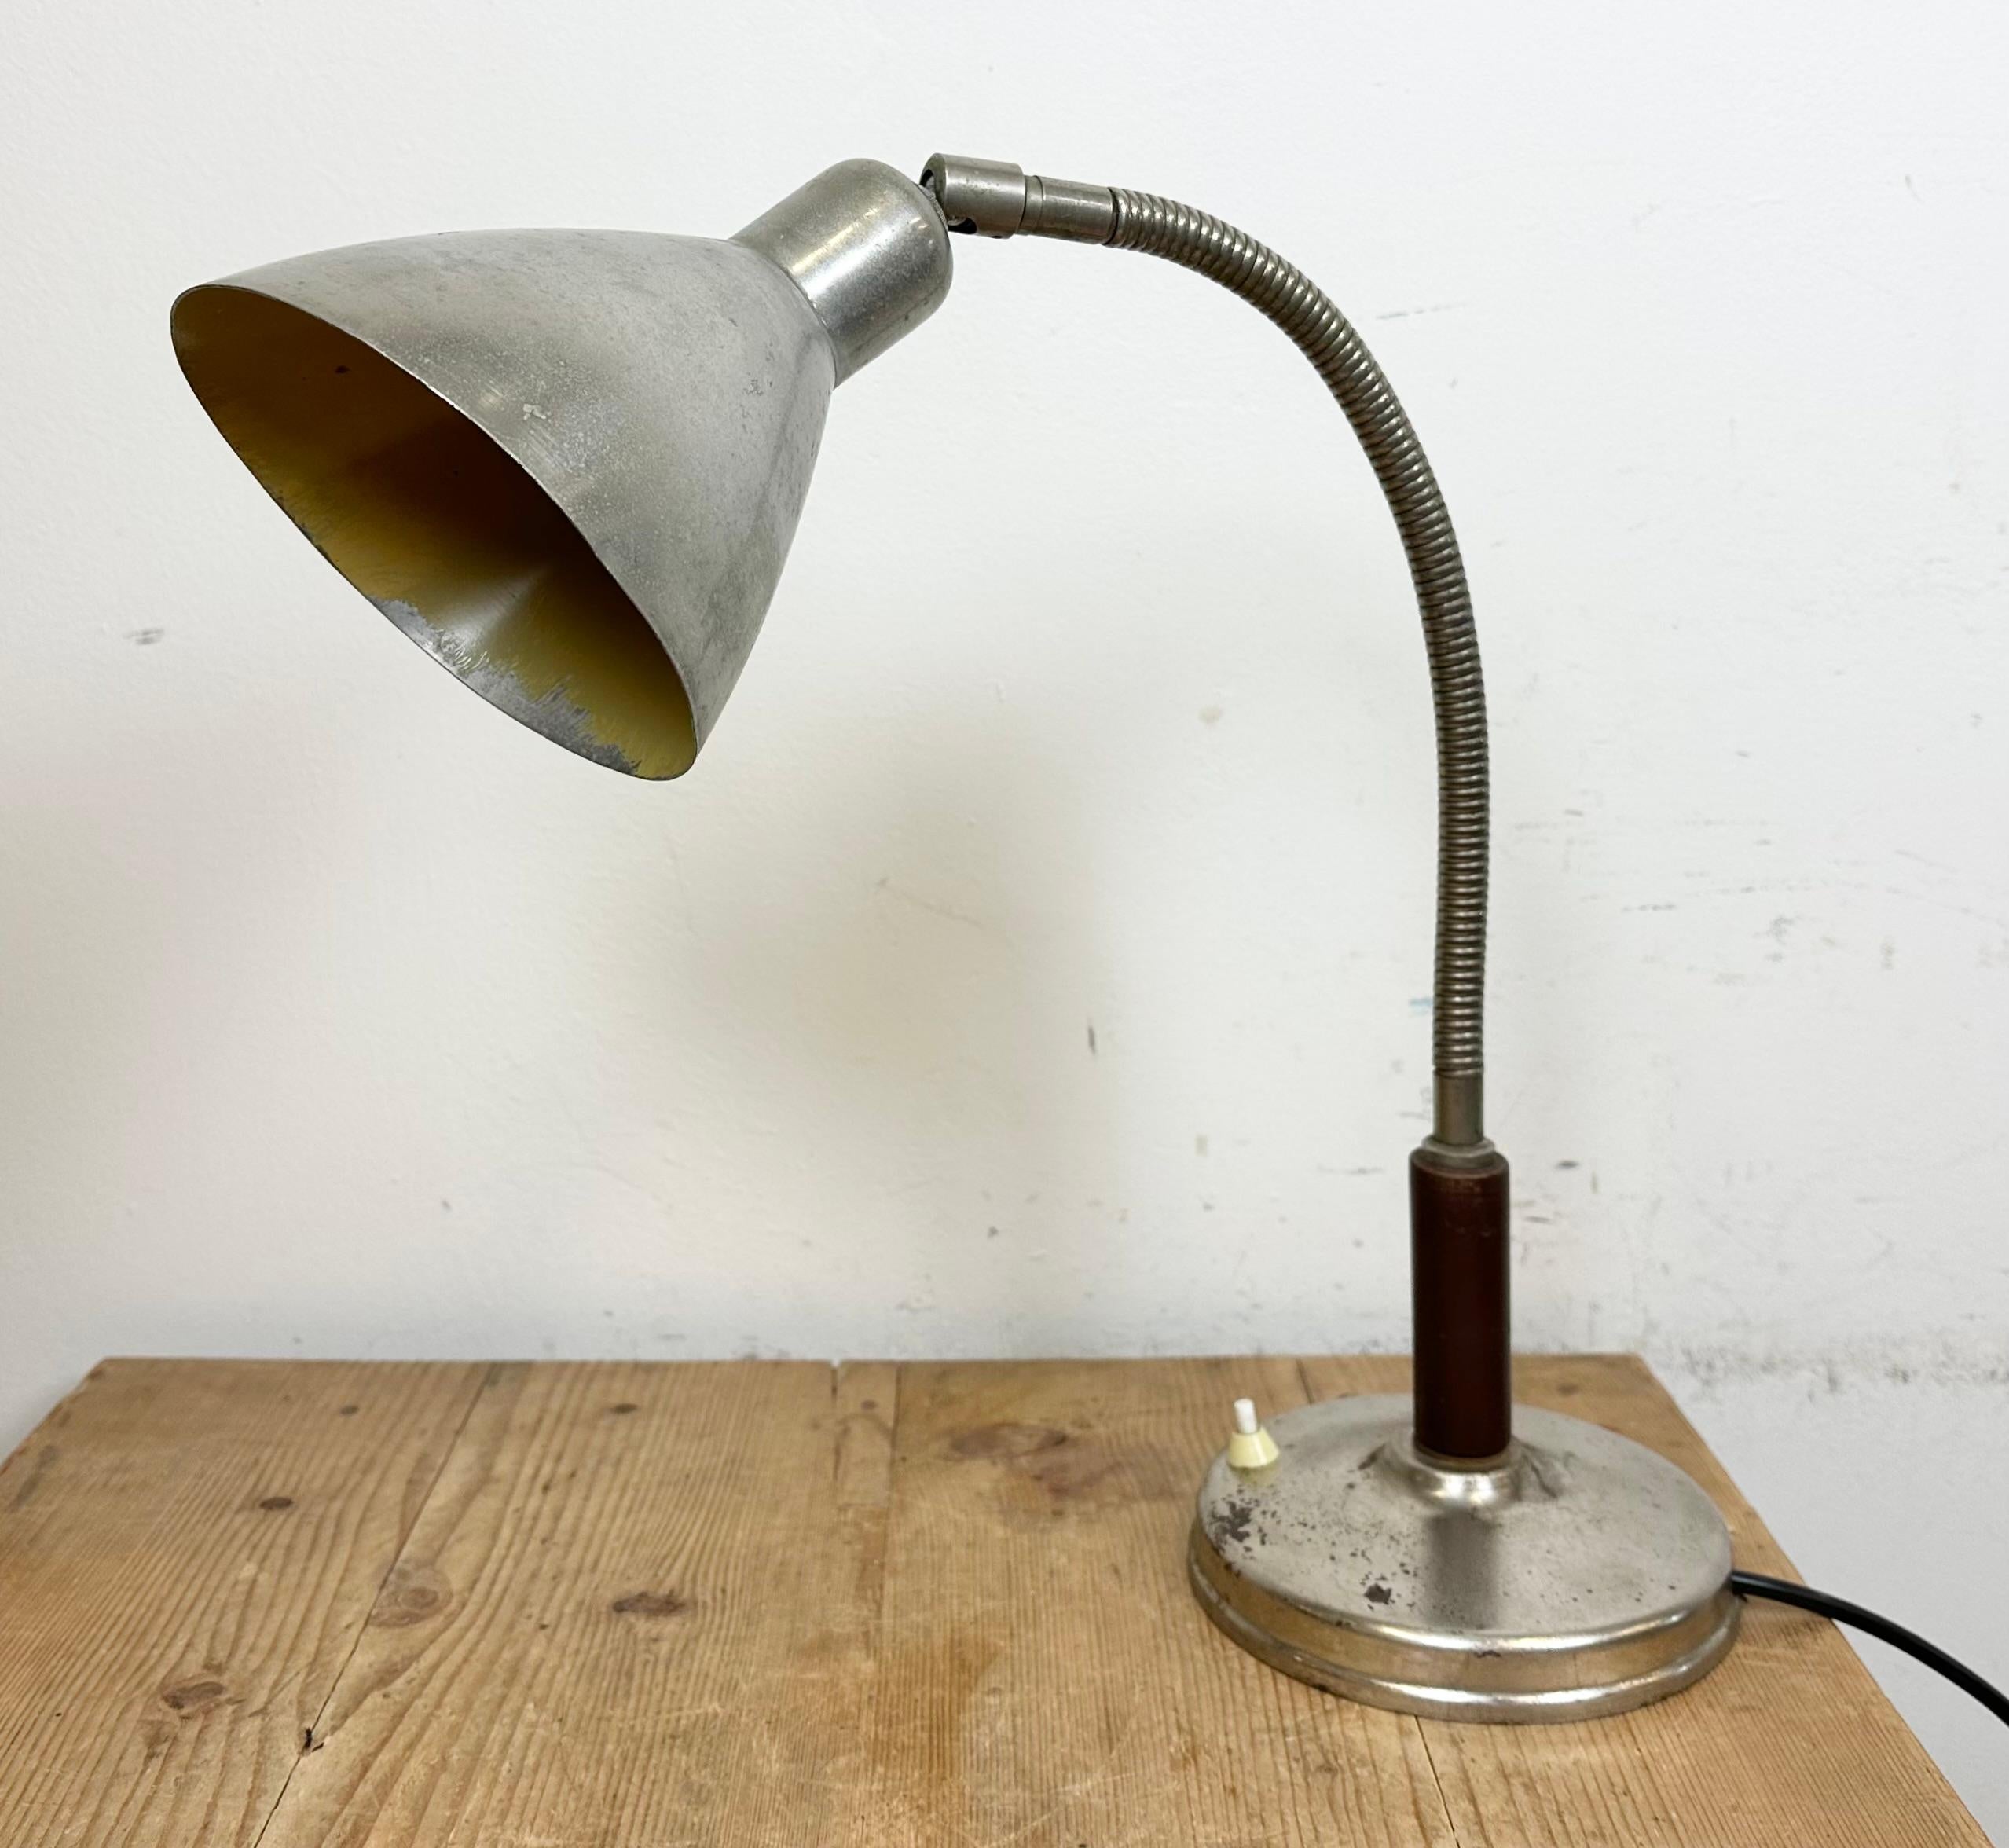 Vintage industrial adjustable table lamp made in former Czechoslovakia during the 1950s It features an aluminium shade and a chrome plated base and arm with wooden handle The original socket requires standard E27/E26 lightbulbs. New wire.
The